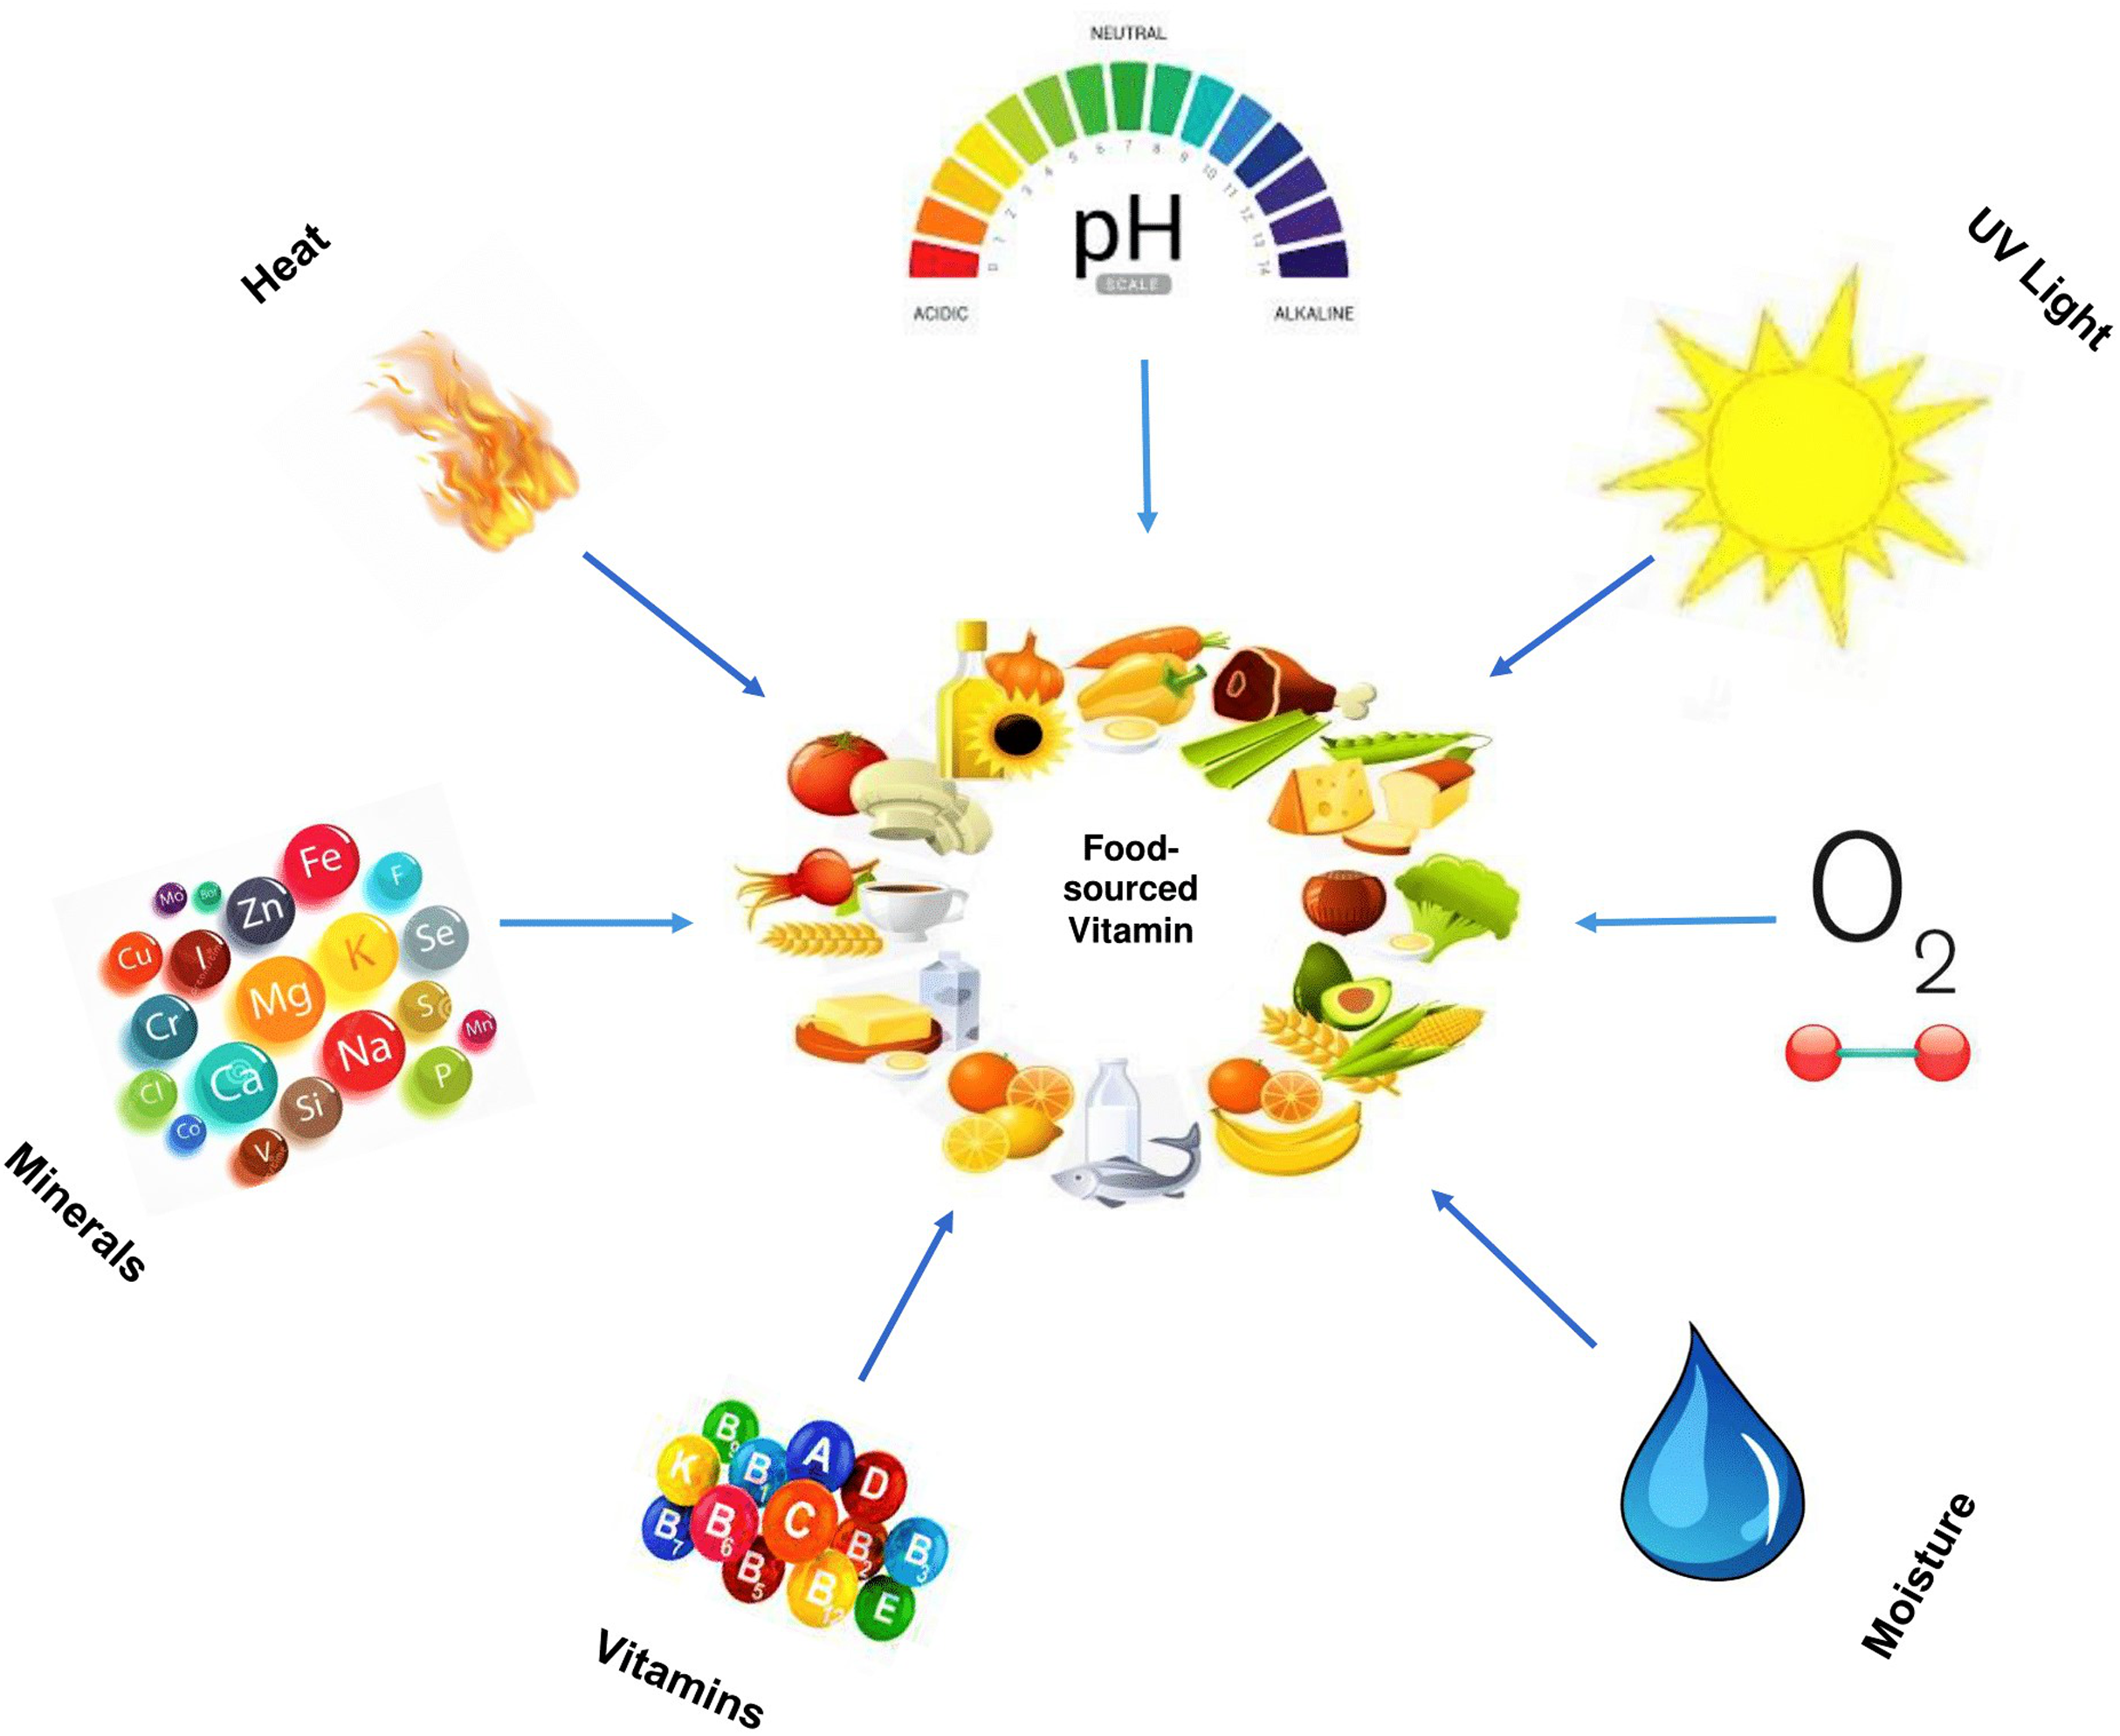 Revisiting Food Sourced Vitamins For Consumer Diet And Health Needs A Perspective Review From Vitamin Classification Metabolic Functions Absorption Utilization To Balancing Nutritional Requirements Peerj